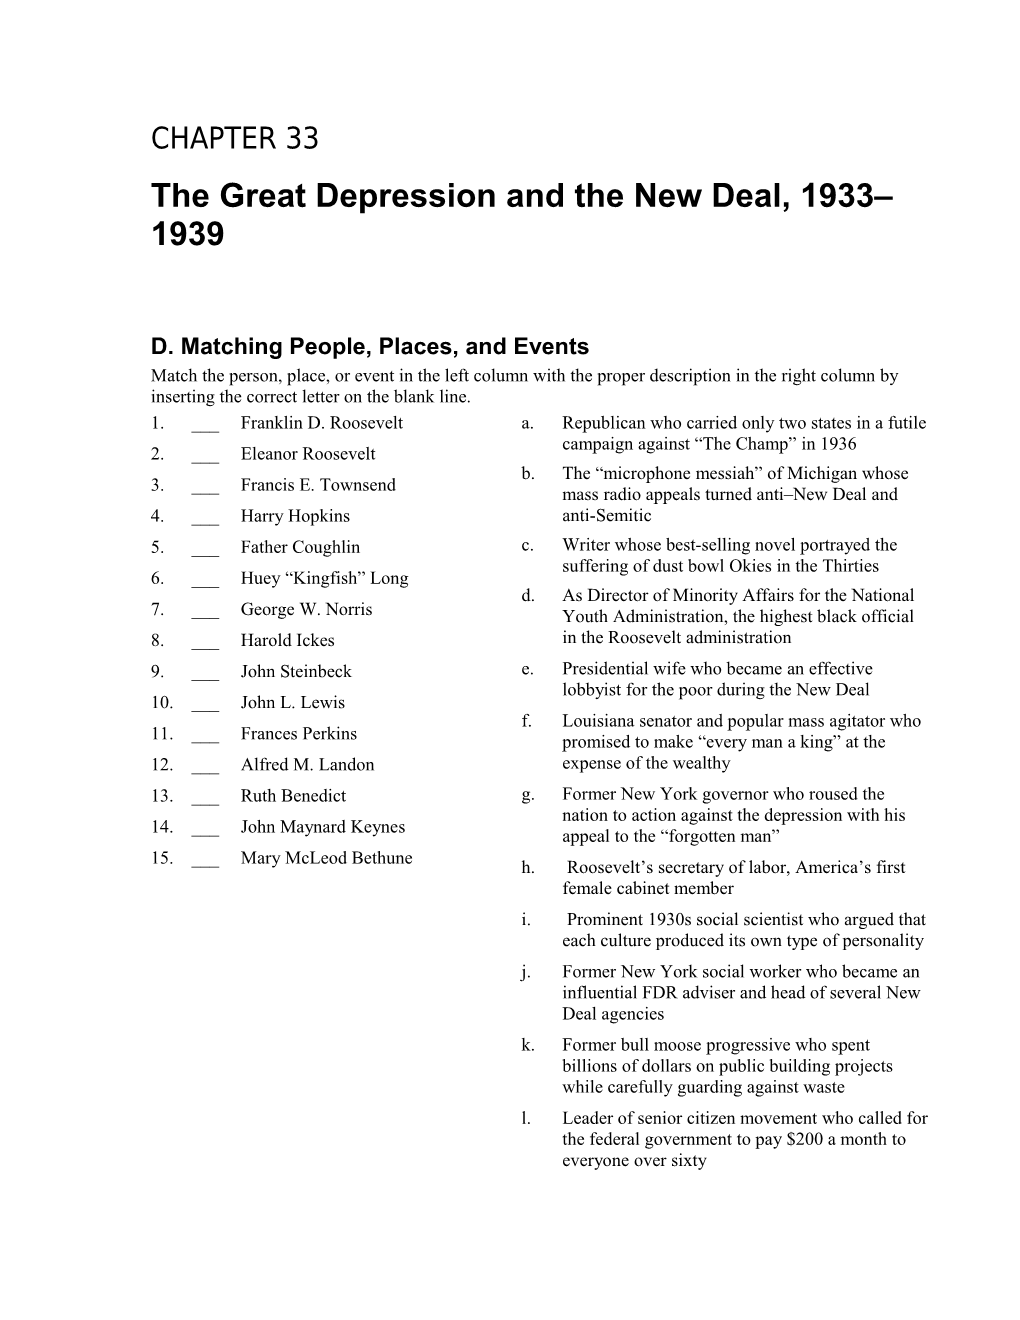 The Great Depression and the New Deal, 1933 1939